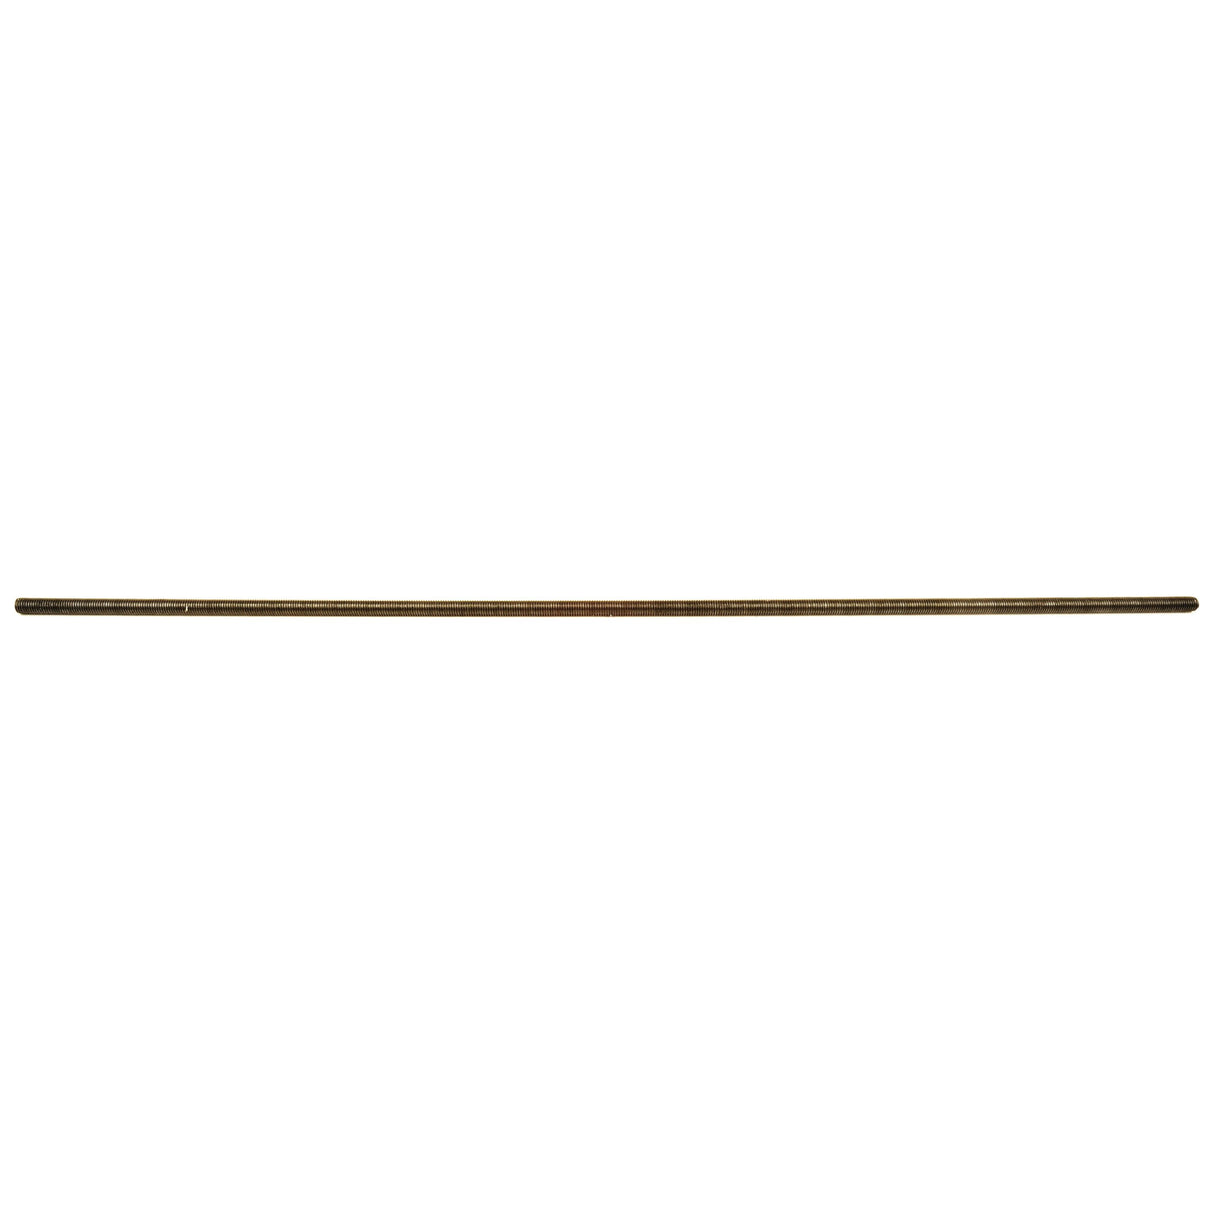 Metric Threaded Bar, Size:⌀14mm, Length: 1M, Tensile strength: 4.6.
 - S.8321 - Farming Parts